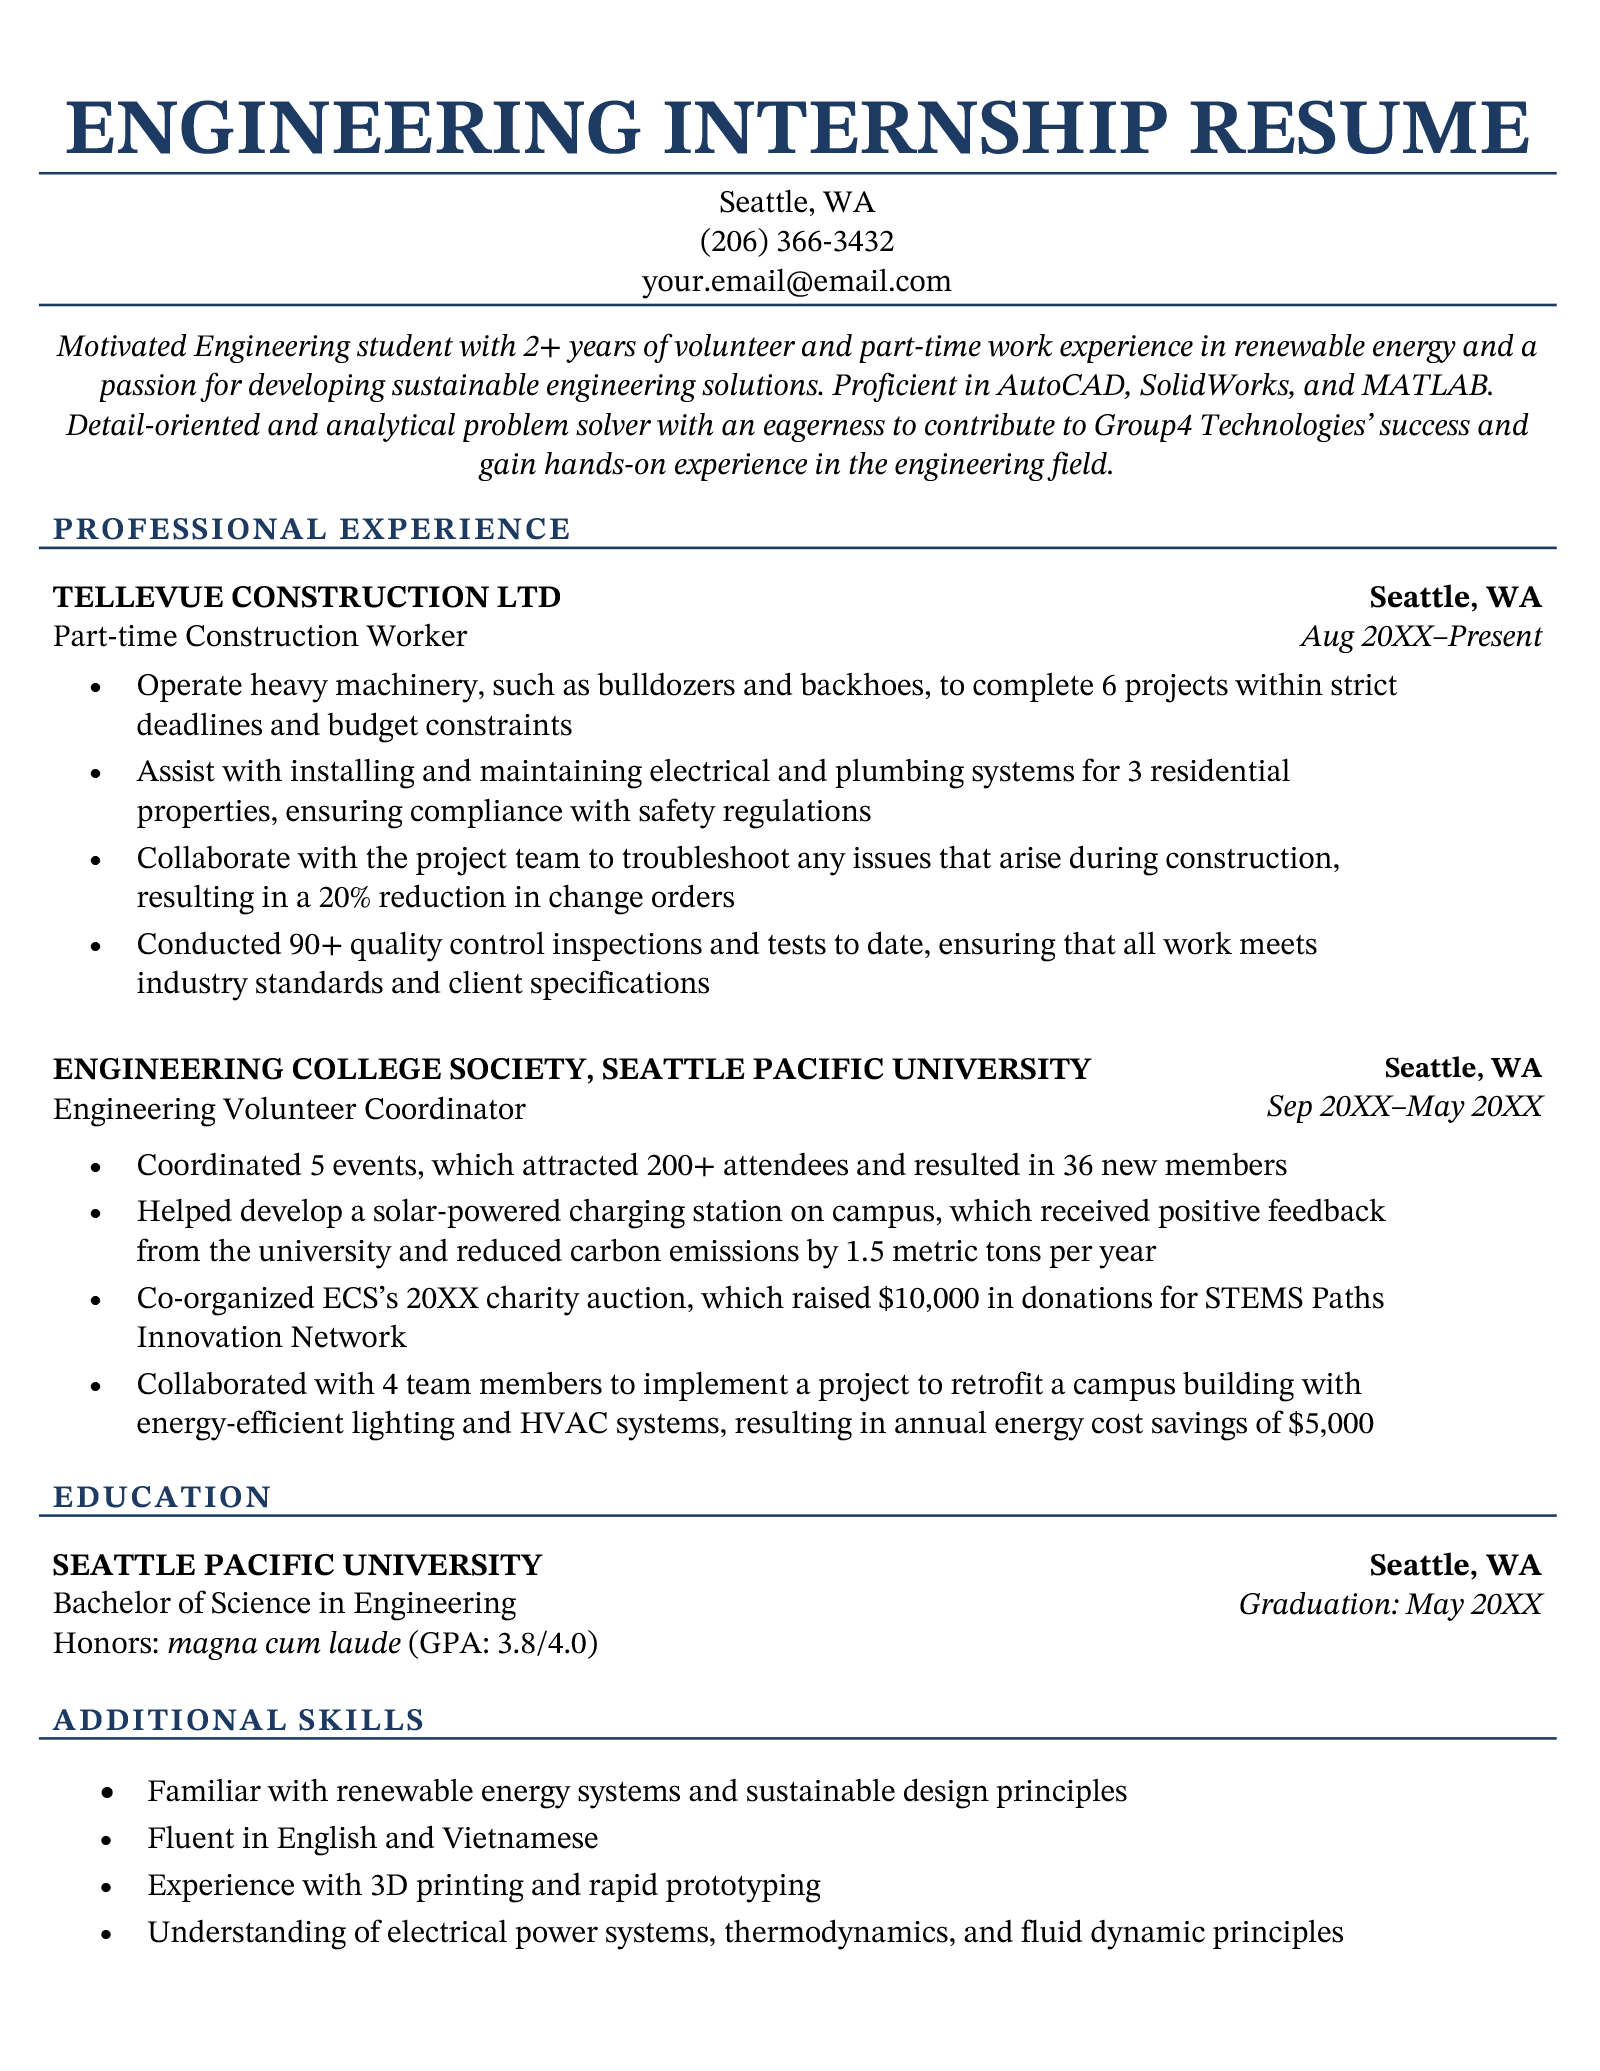 An resume for an engineering internship example on a template with a dark blue header to accentuate the applicant's name, followed by other dark blue headers to label the applicant's professional experience, education, and additional skills sections